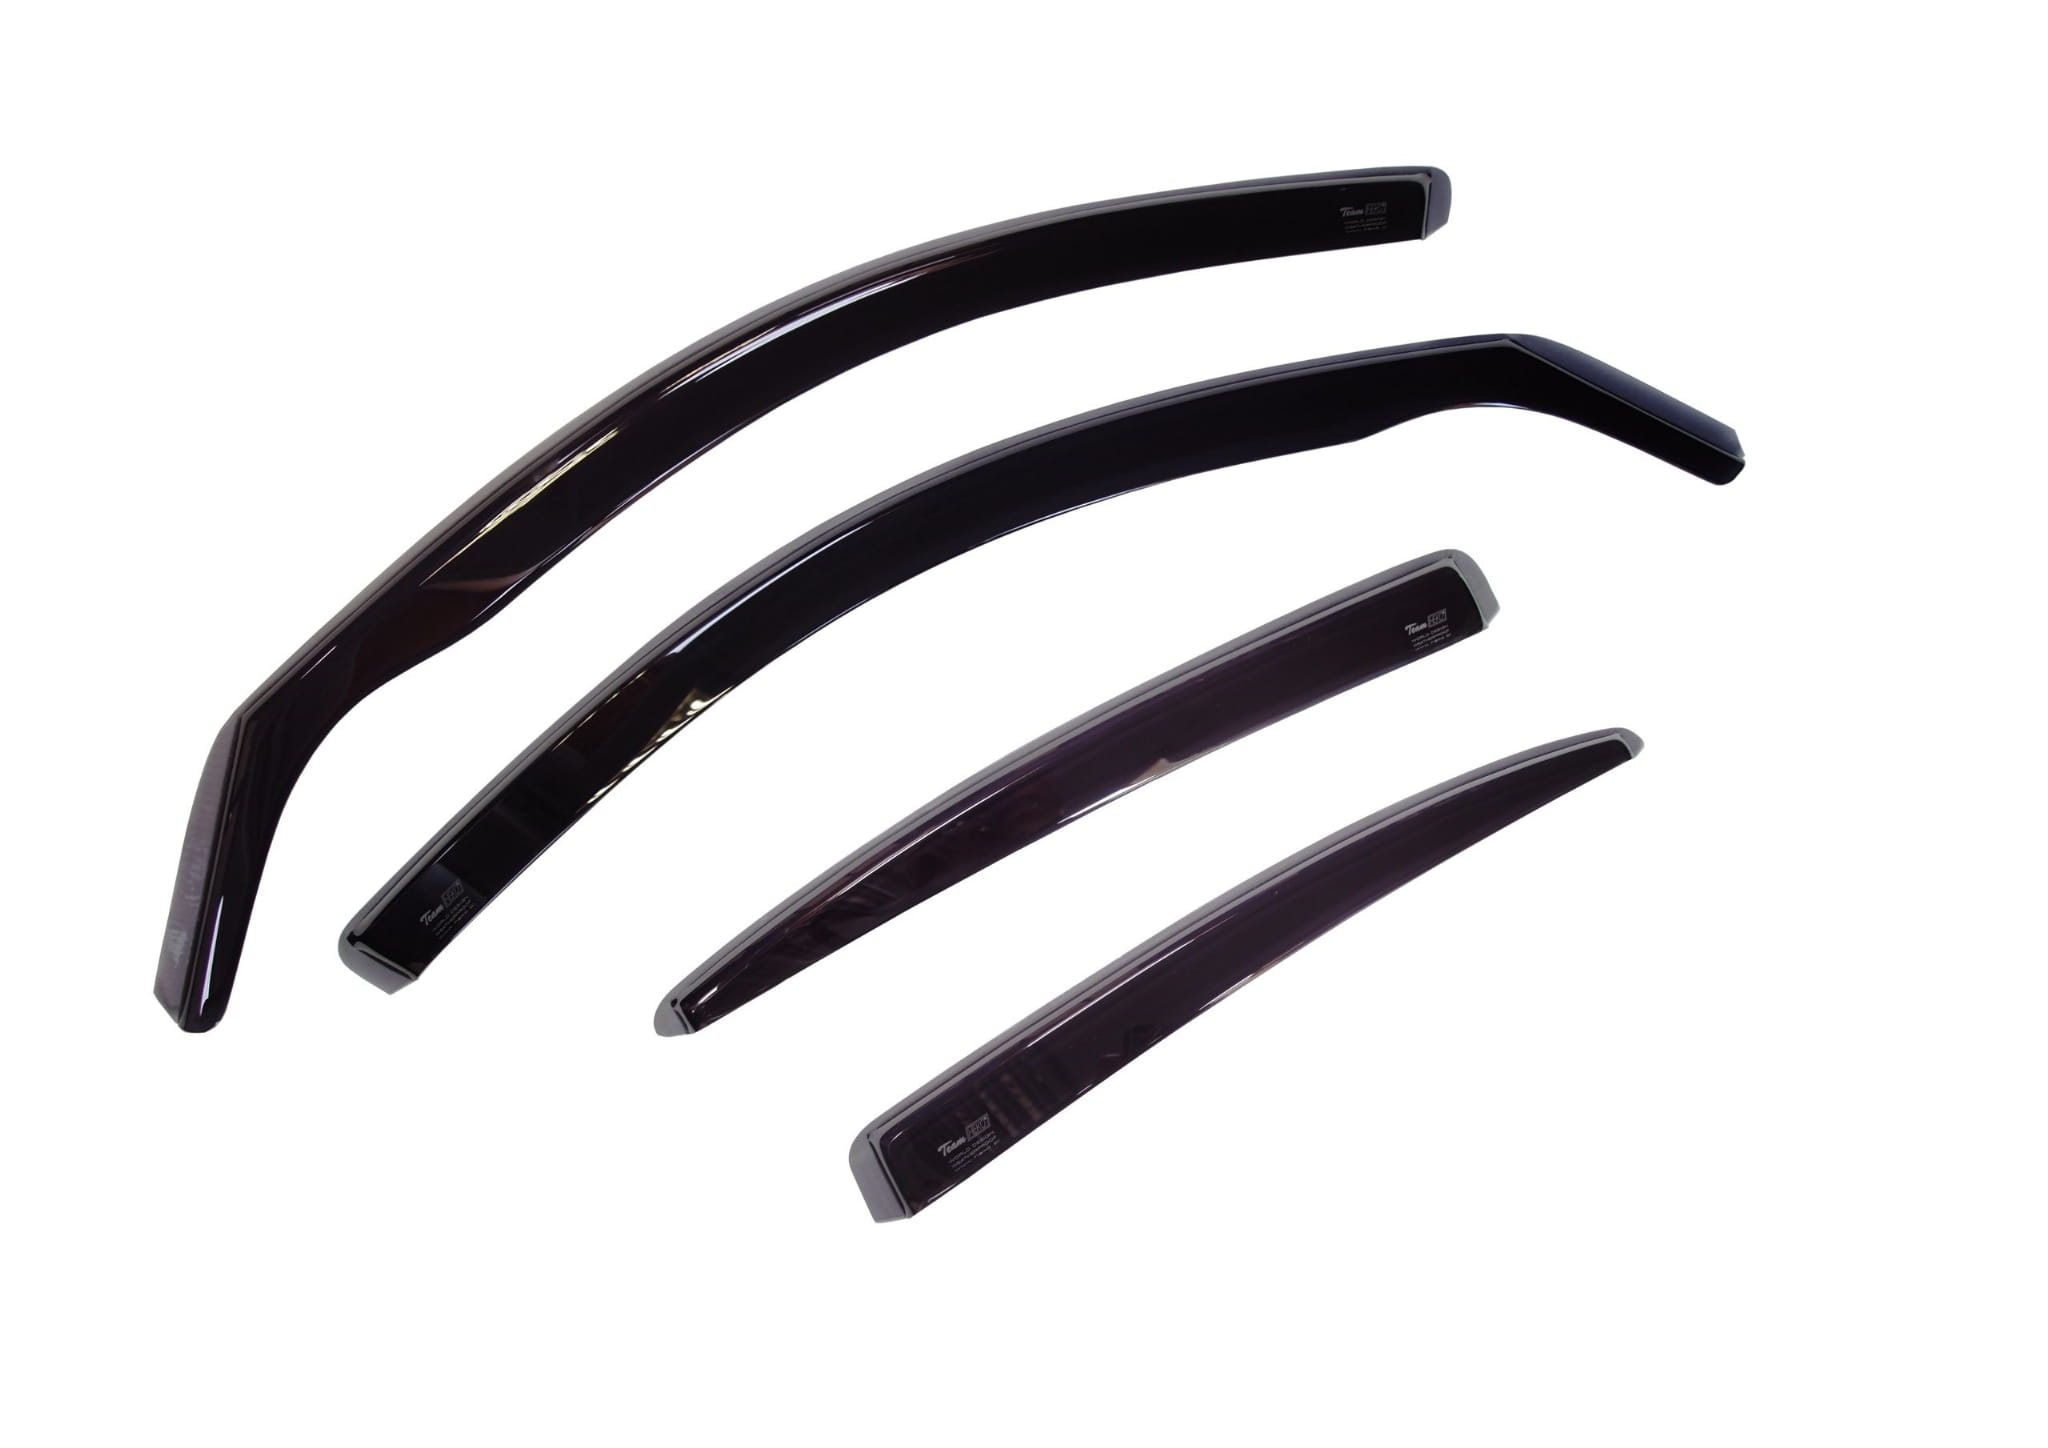 TOYOTA AVENSIS 4DR 2009> TEAM HEKO Wind Deflectors 4PC Set, Wind deflectors help maximize air flow through the vehicle when driving without letting rain in.